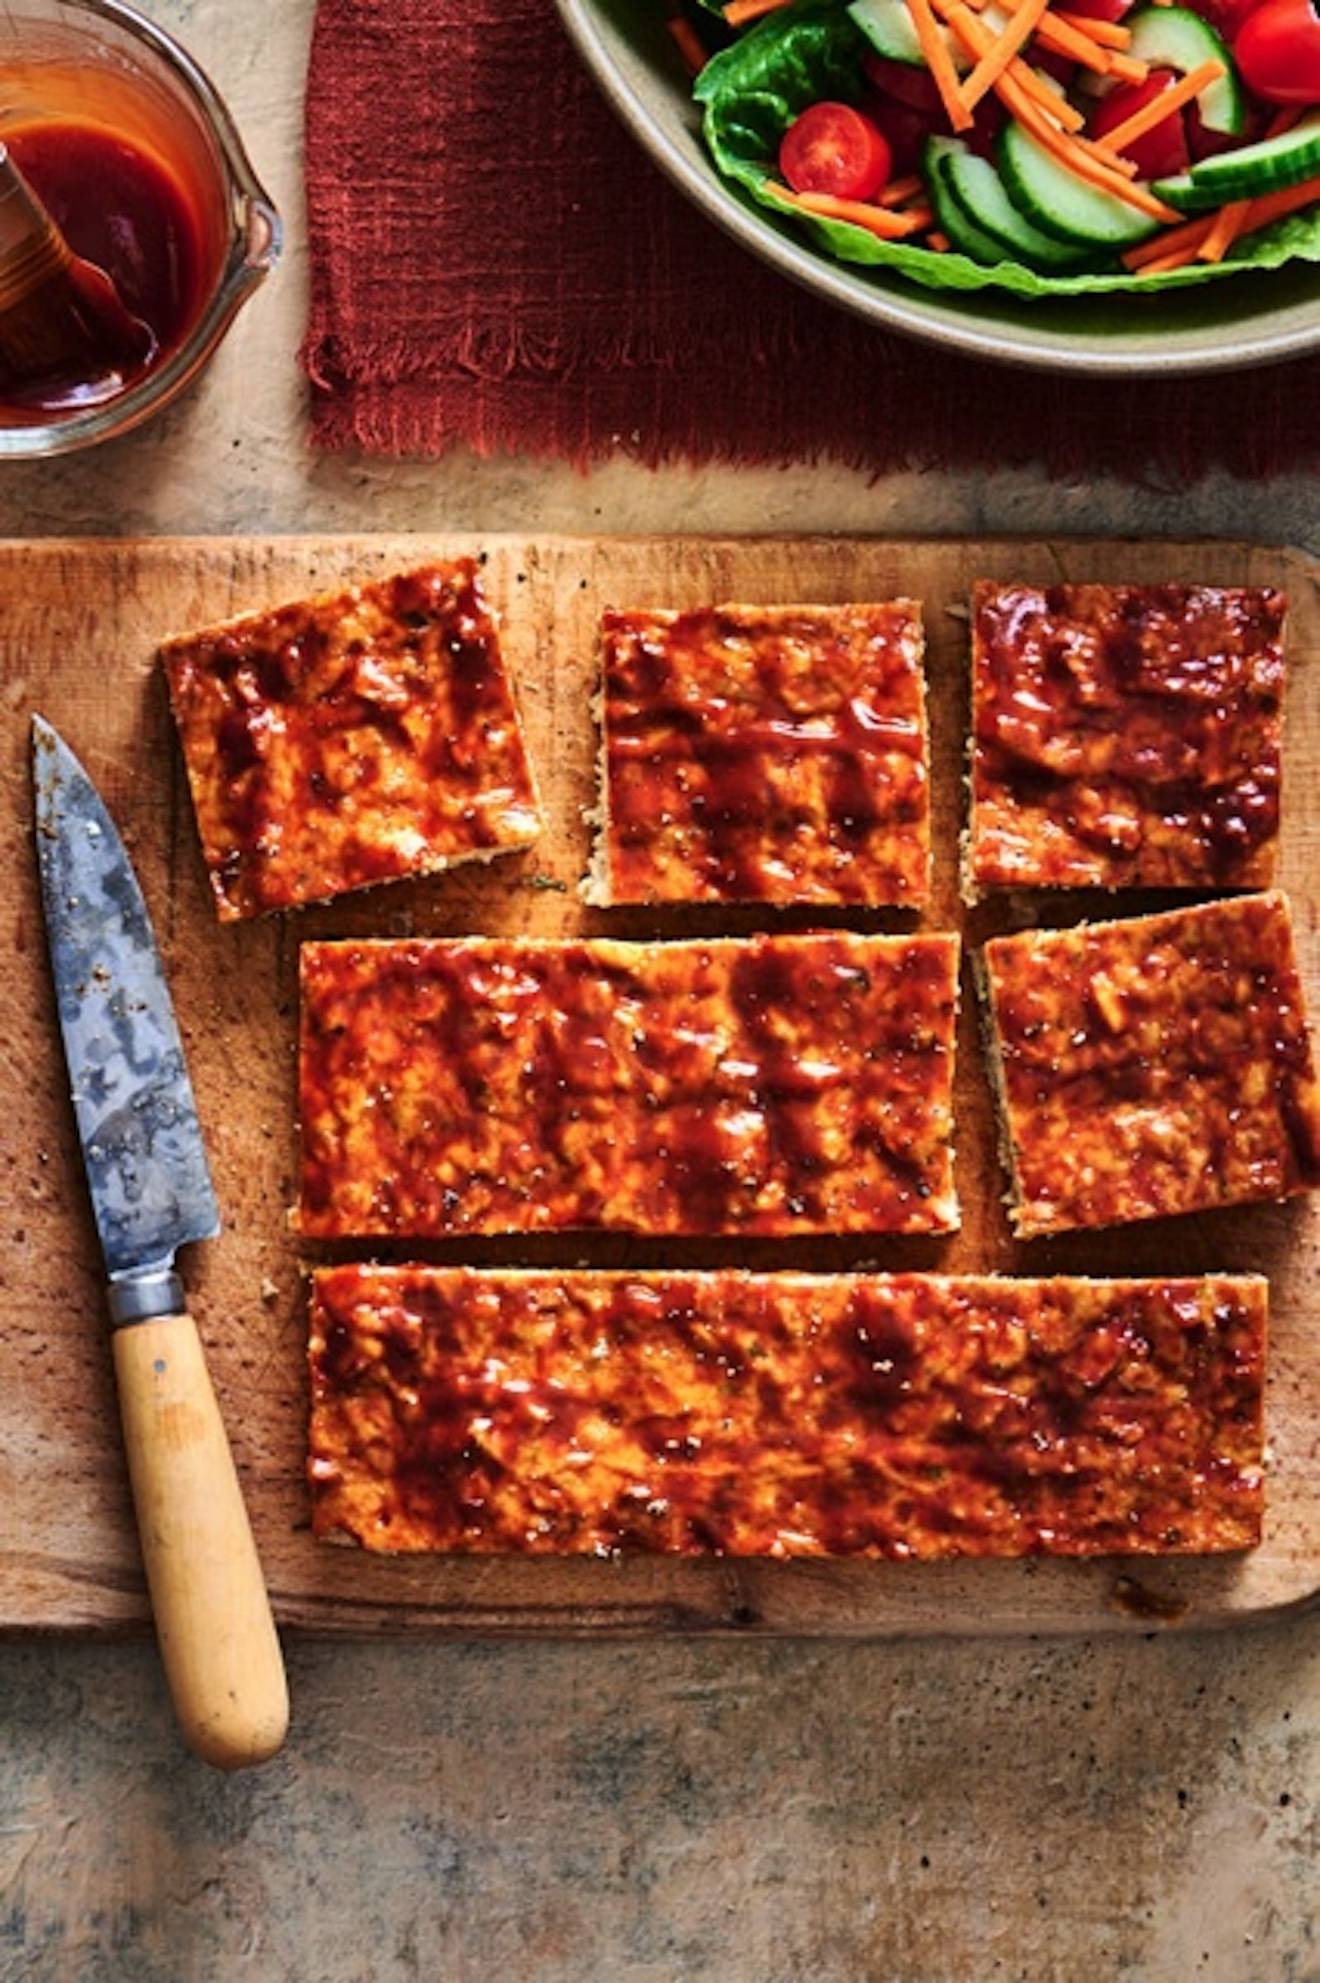 A photograph of meatloaf cut into squares on a cutting board with a green salad in the upper right corner.